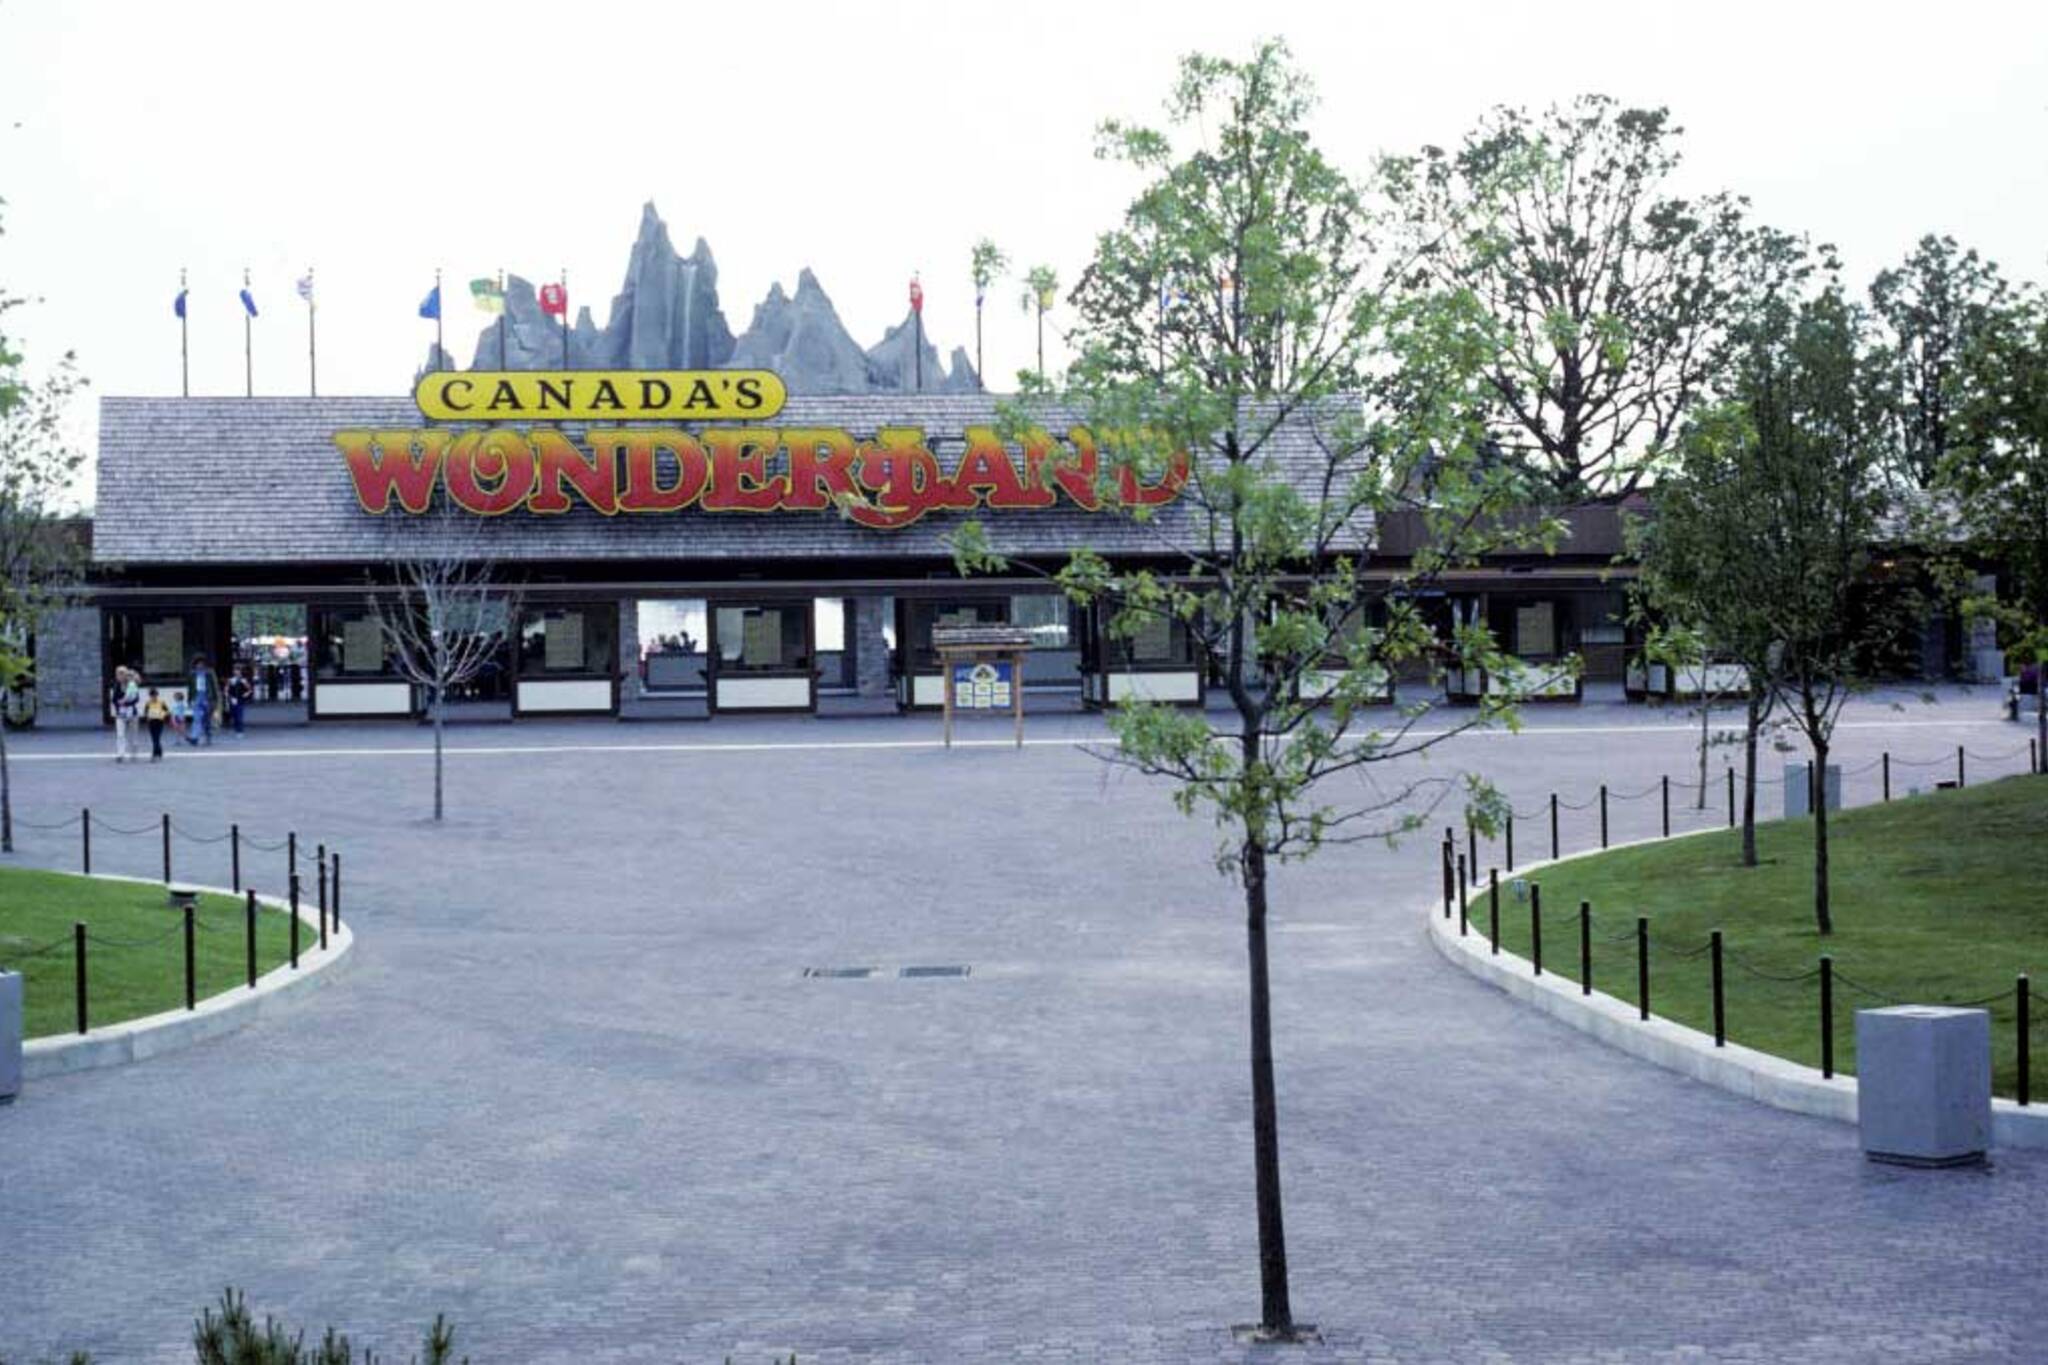 This is what Canada's Wonderland looked like in the 1980s